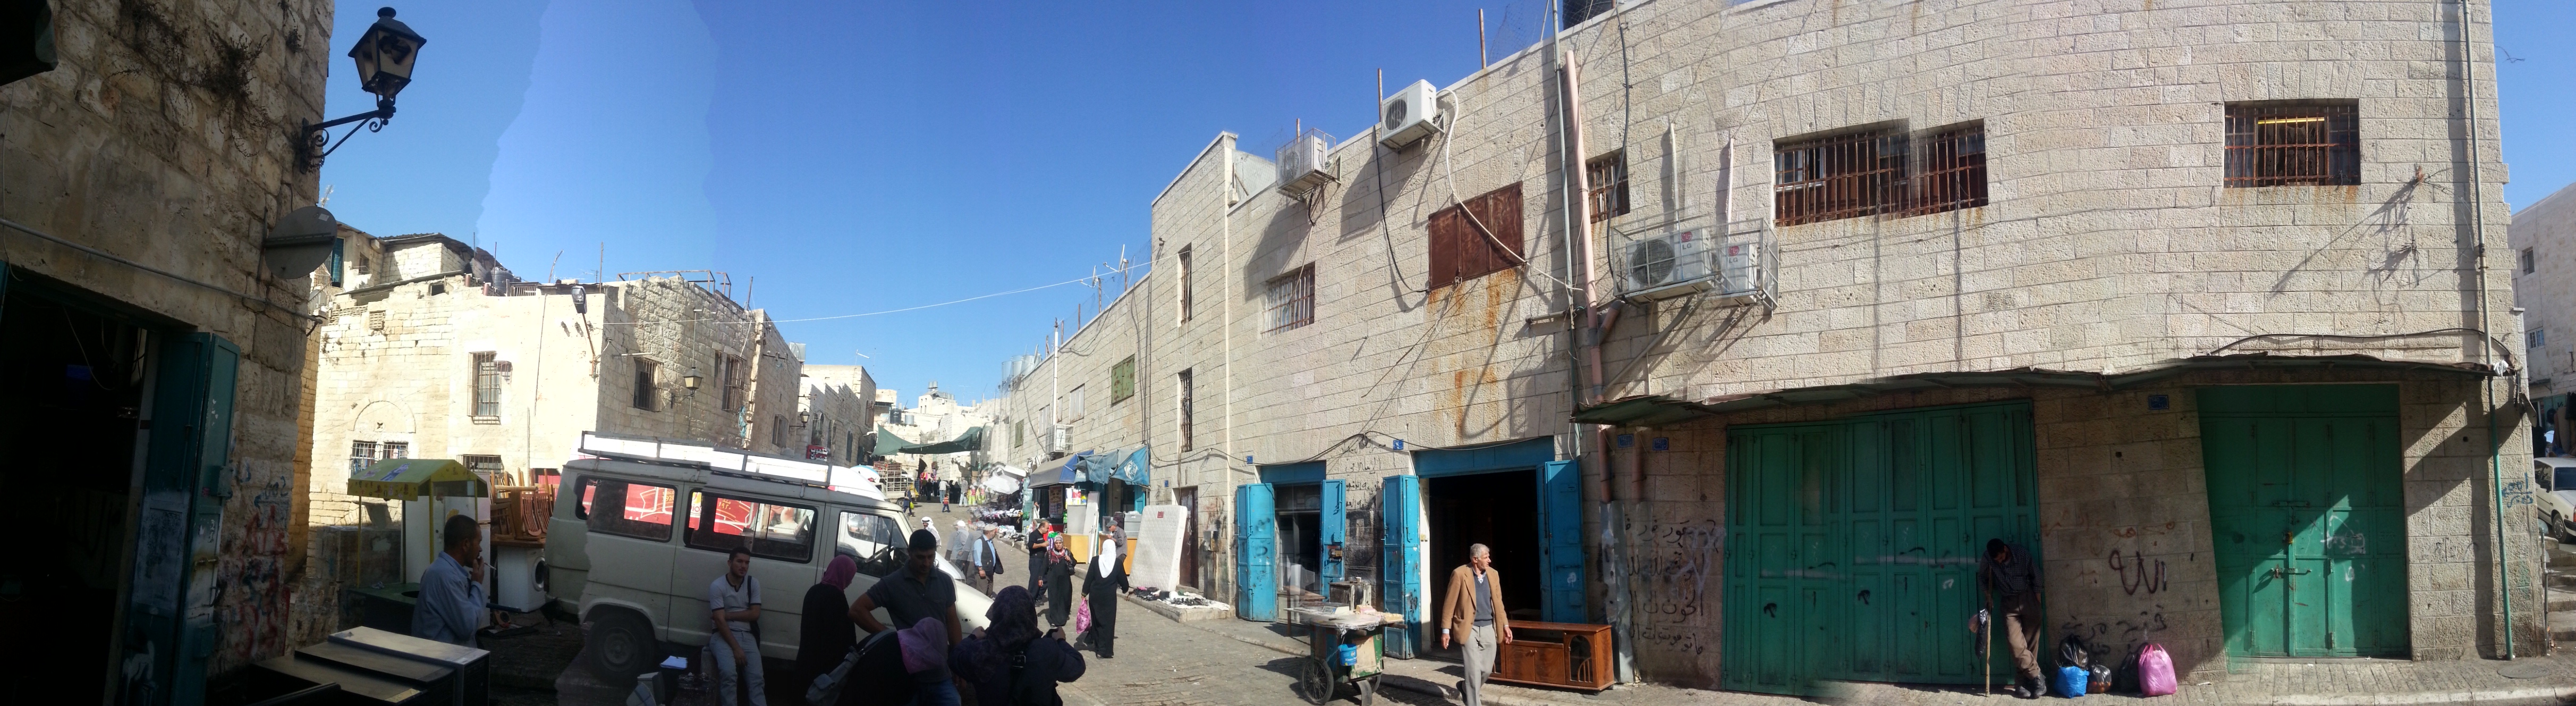 <p>Al-Najajreh Street general view. Mixed car-pedestrian movement, encroachment on the sidewalks by the shop keepers, building facades need renovation &amp; tidiness.</p>